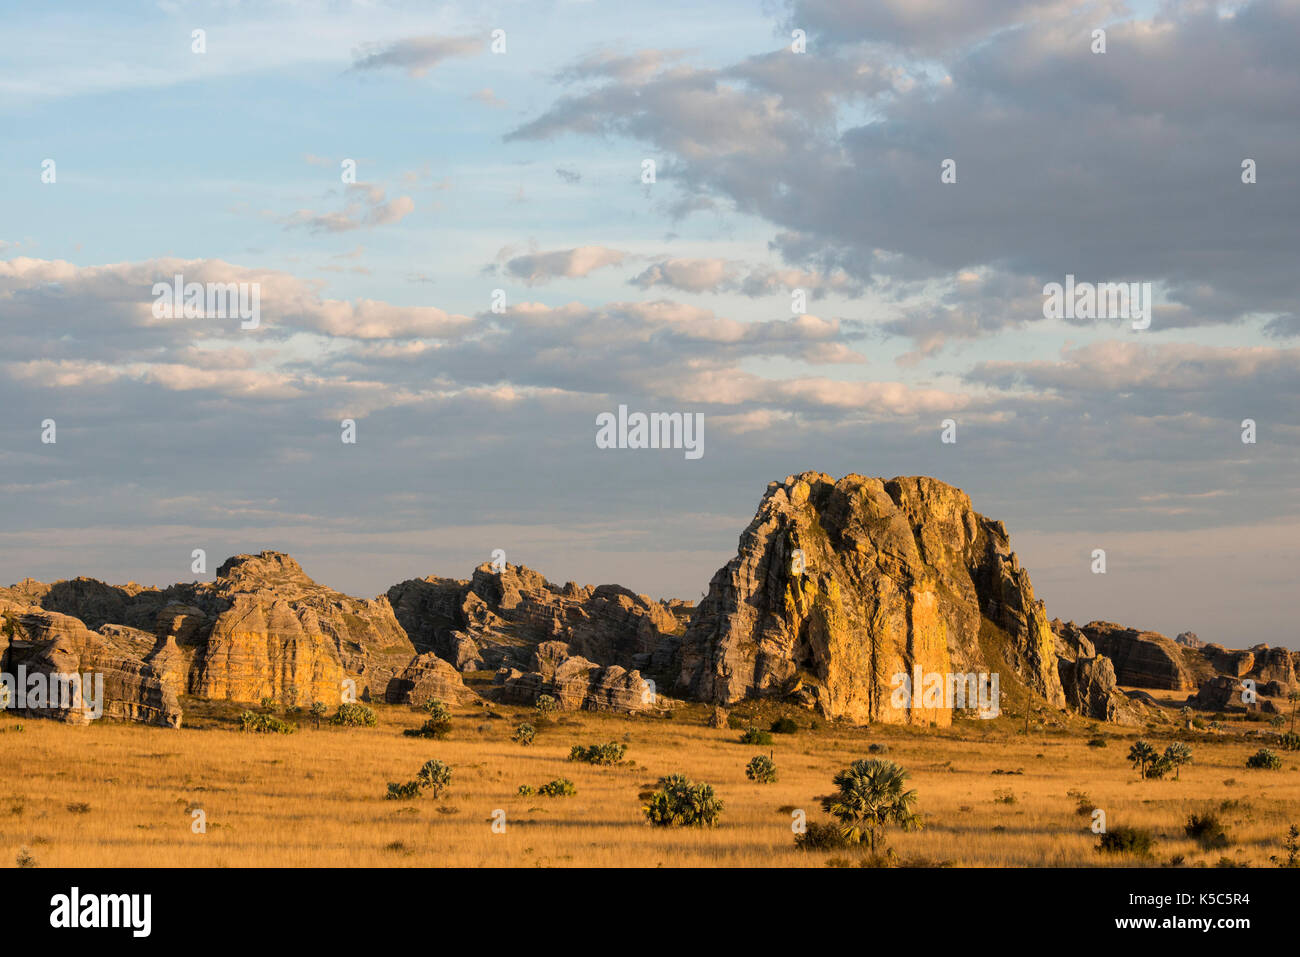 Sandstone formations jutting out from grassland, Isalo National Park, Madagascar Stock Photo